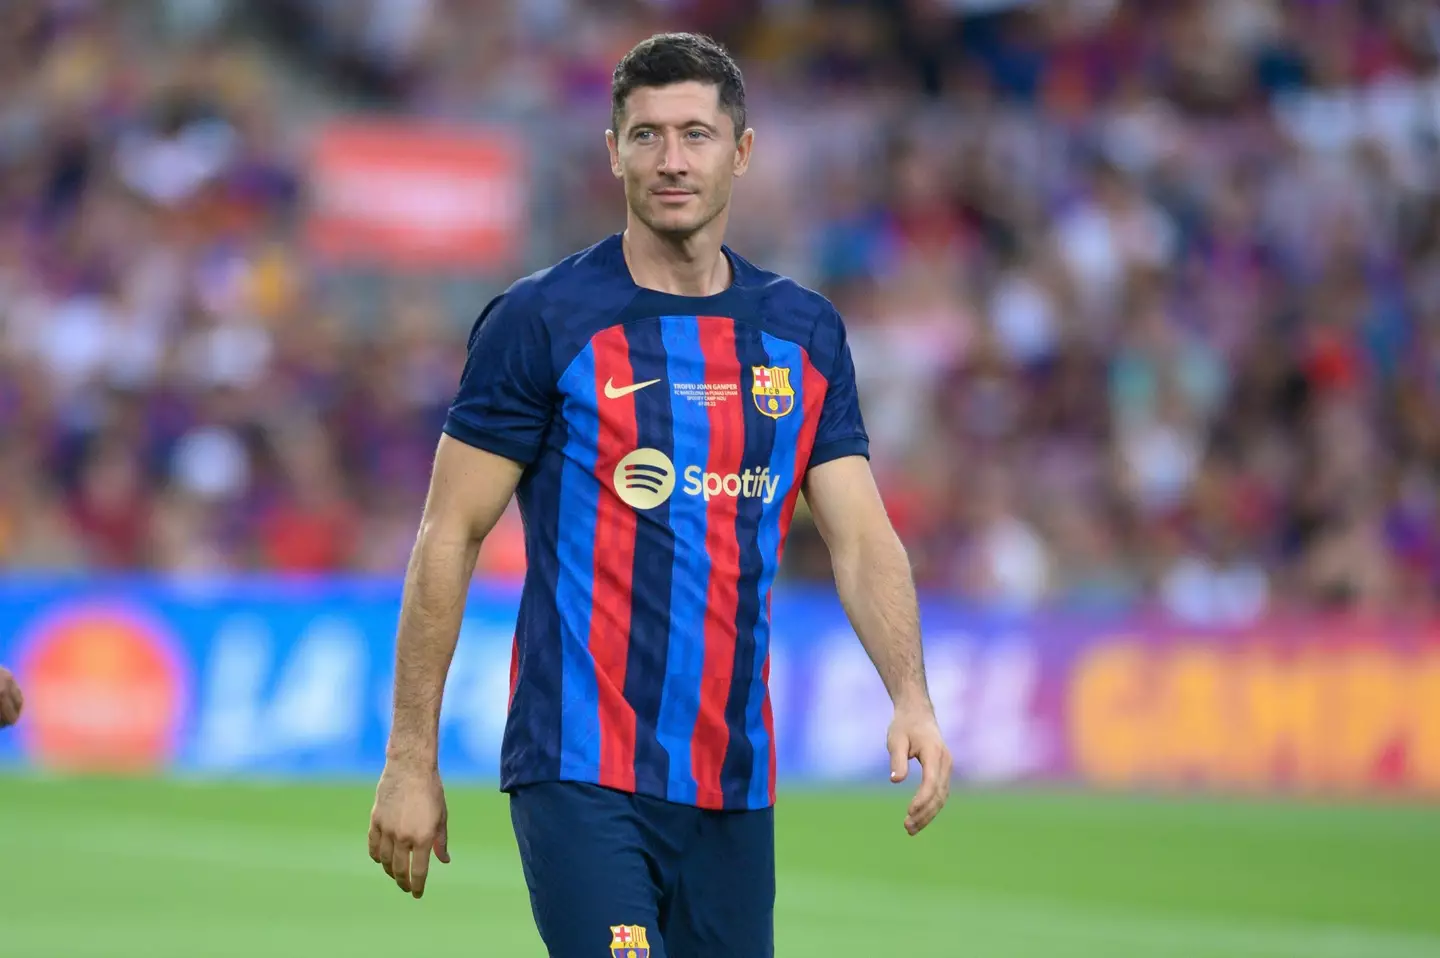 Robert Lewandowski moved to the Camp Nou earlier this summer. (Image